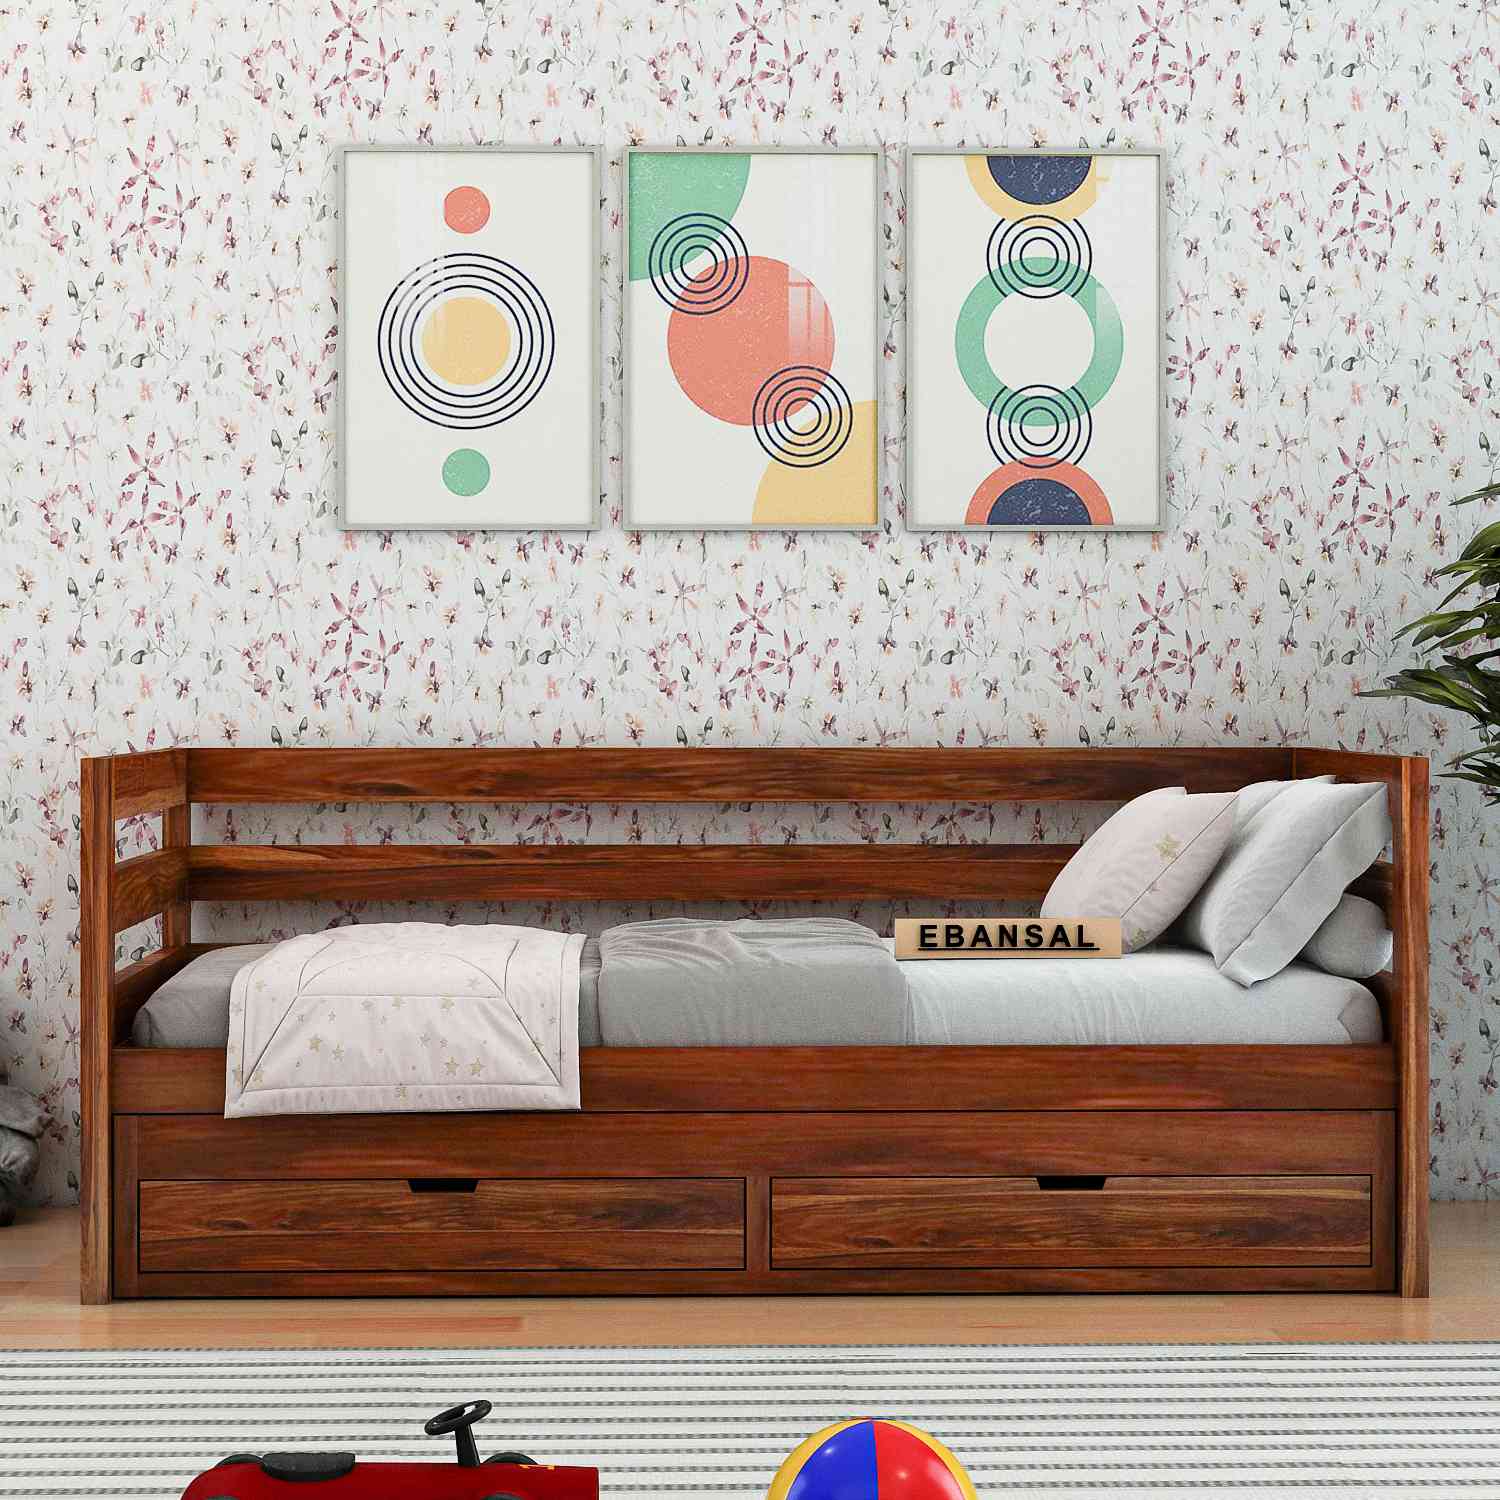 Feelinn Solid Sheesham Wood Trundle Bed For Kids (With Mattress, Natural Finish)